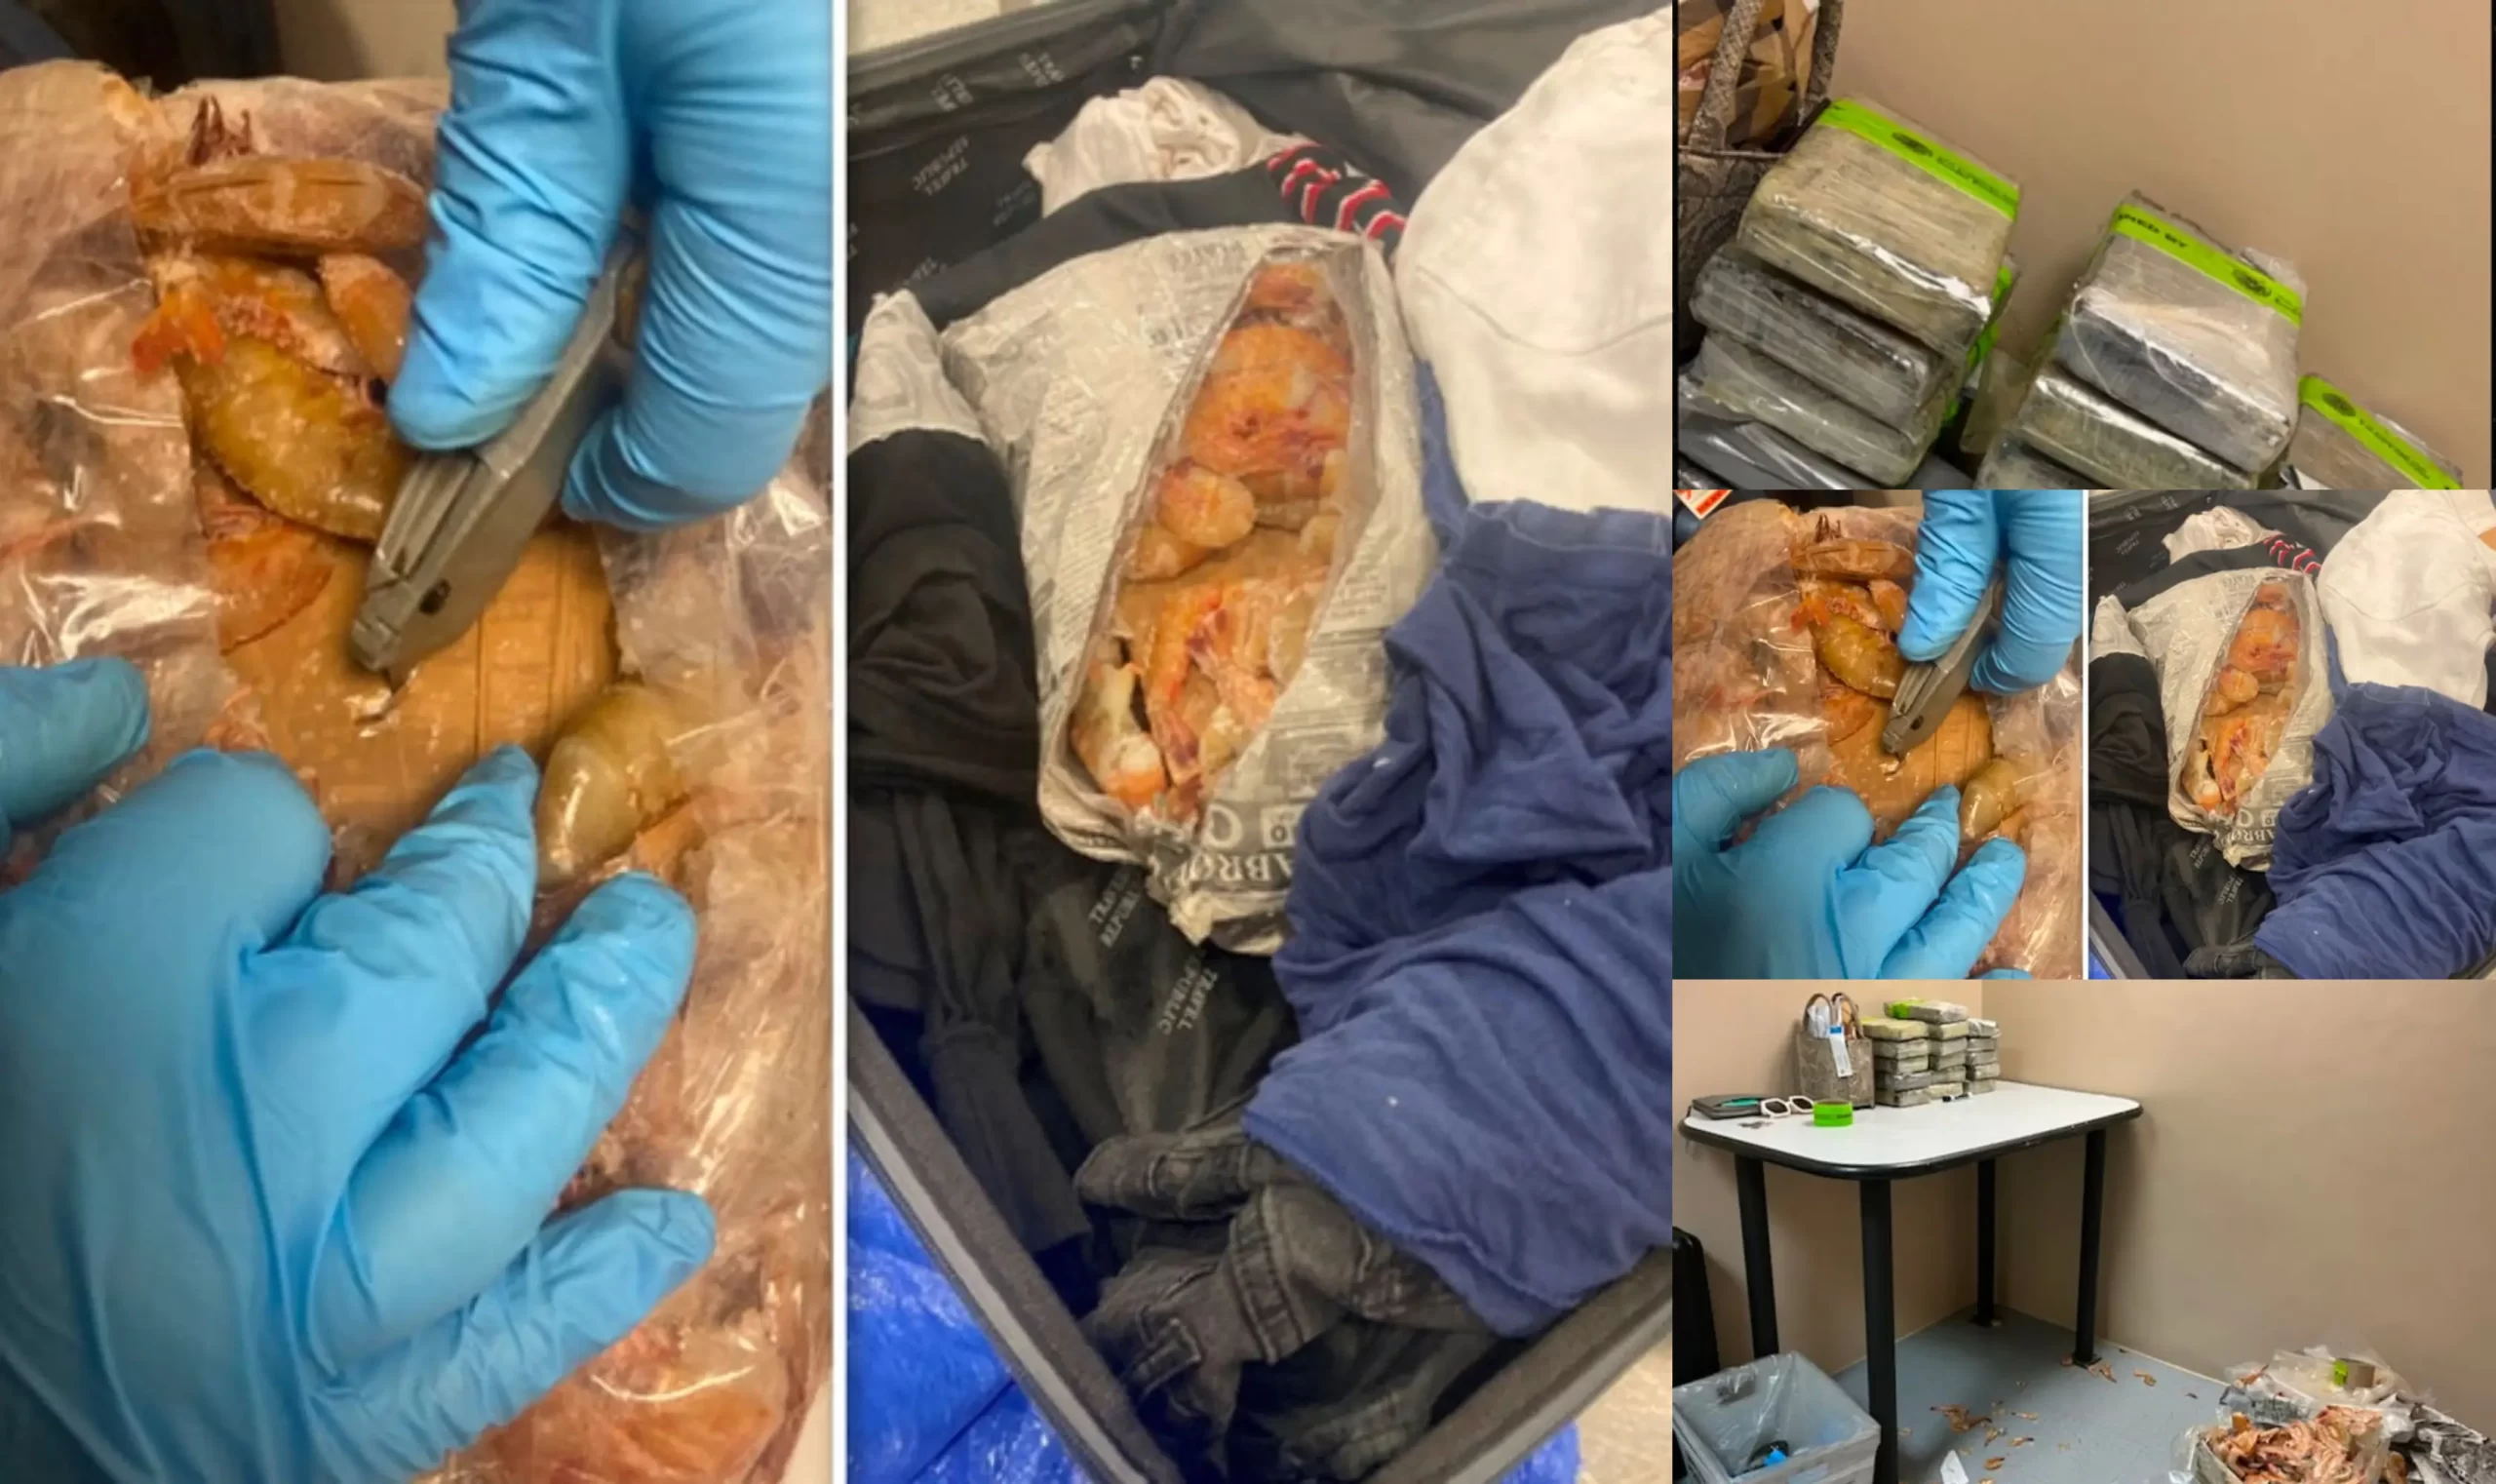 Man Arrested for Cocaine Smuggling in Jumbo Shrimp at JFK Airport